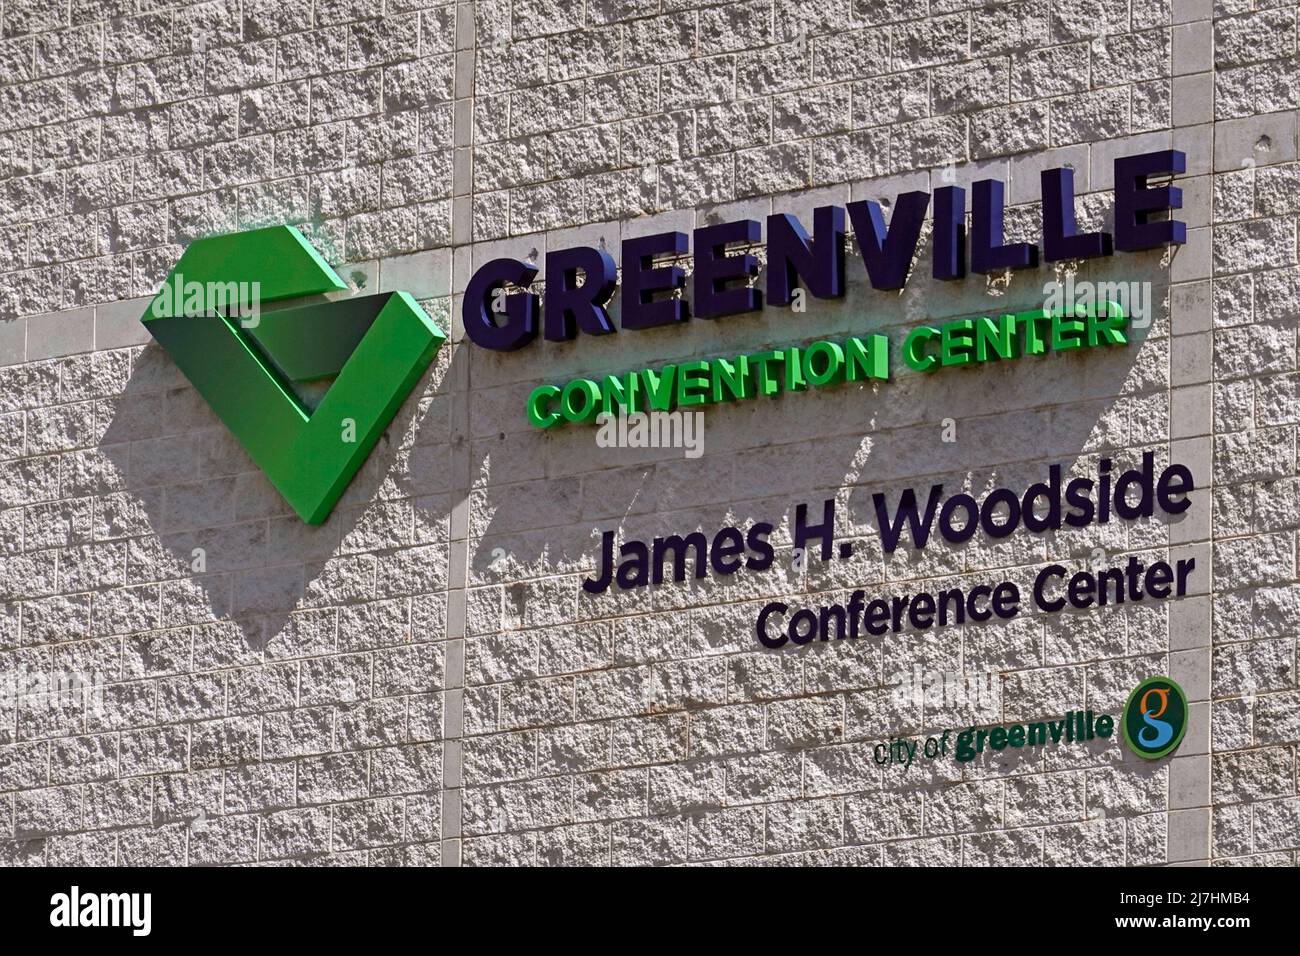 Greenville convention center sign in Greenville SC Stock Photo